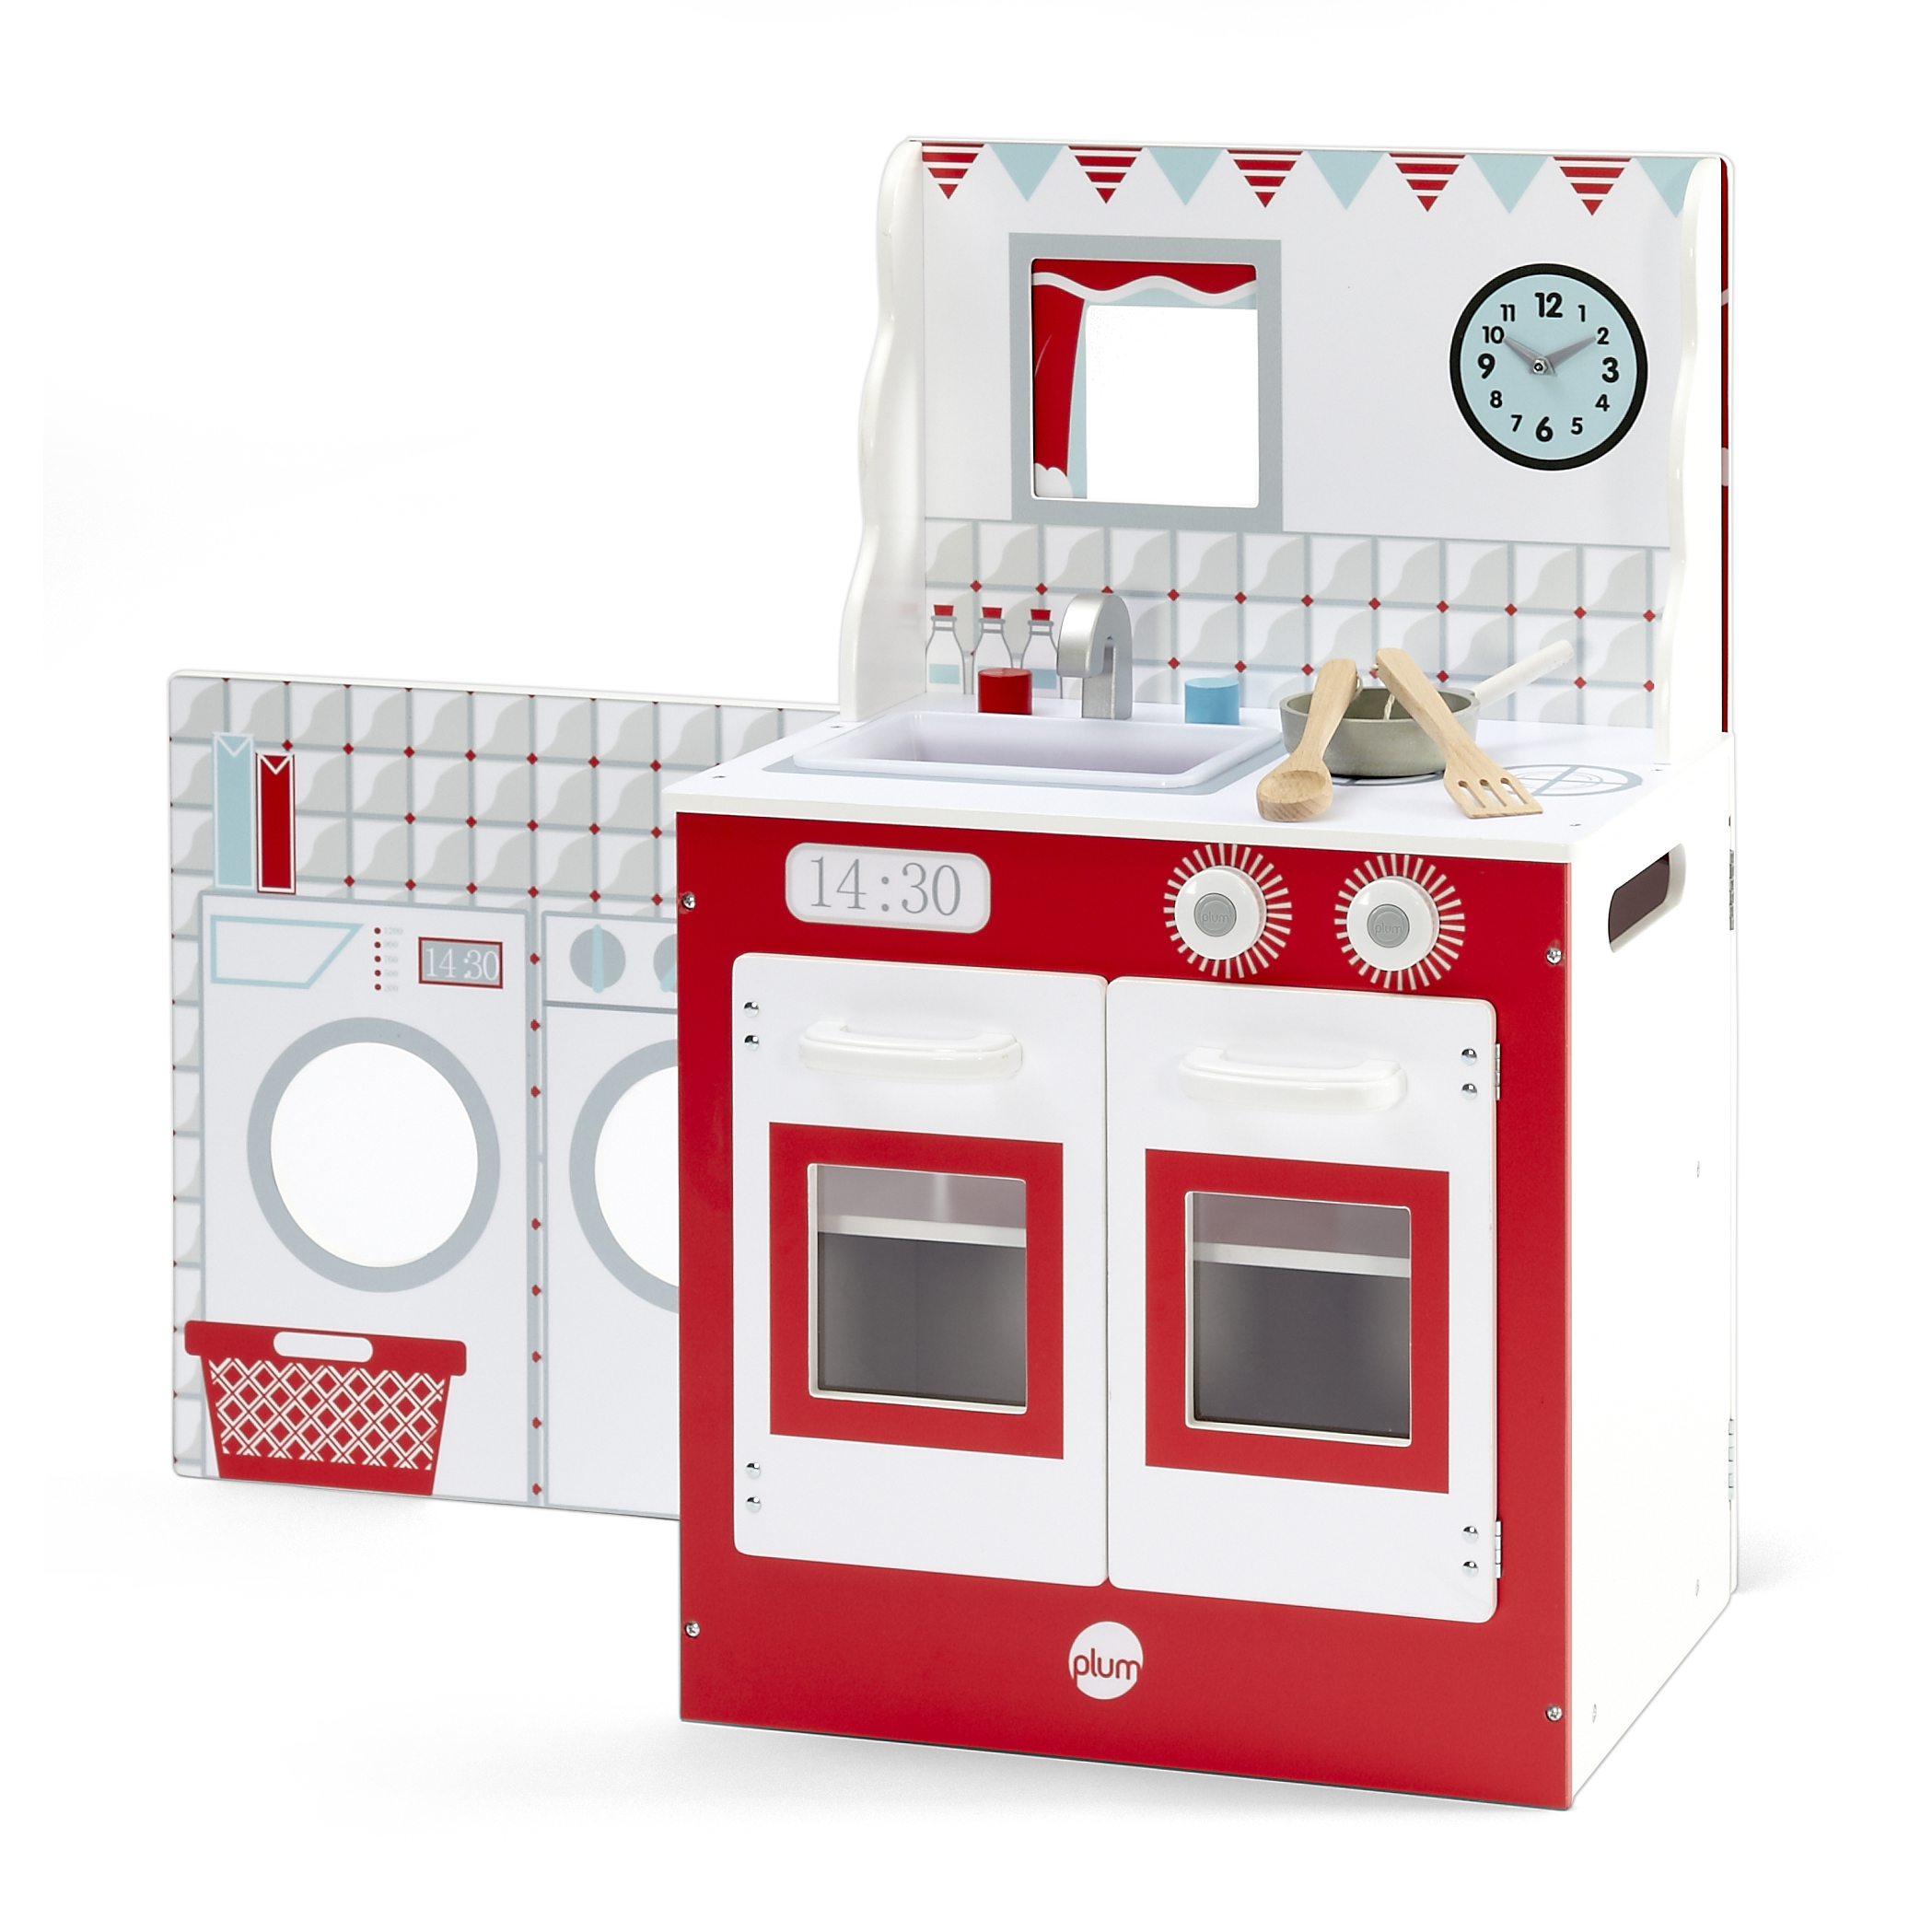 Plum 2 In 1 Kitchen Dolls House - image 3 of 9